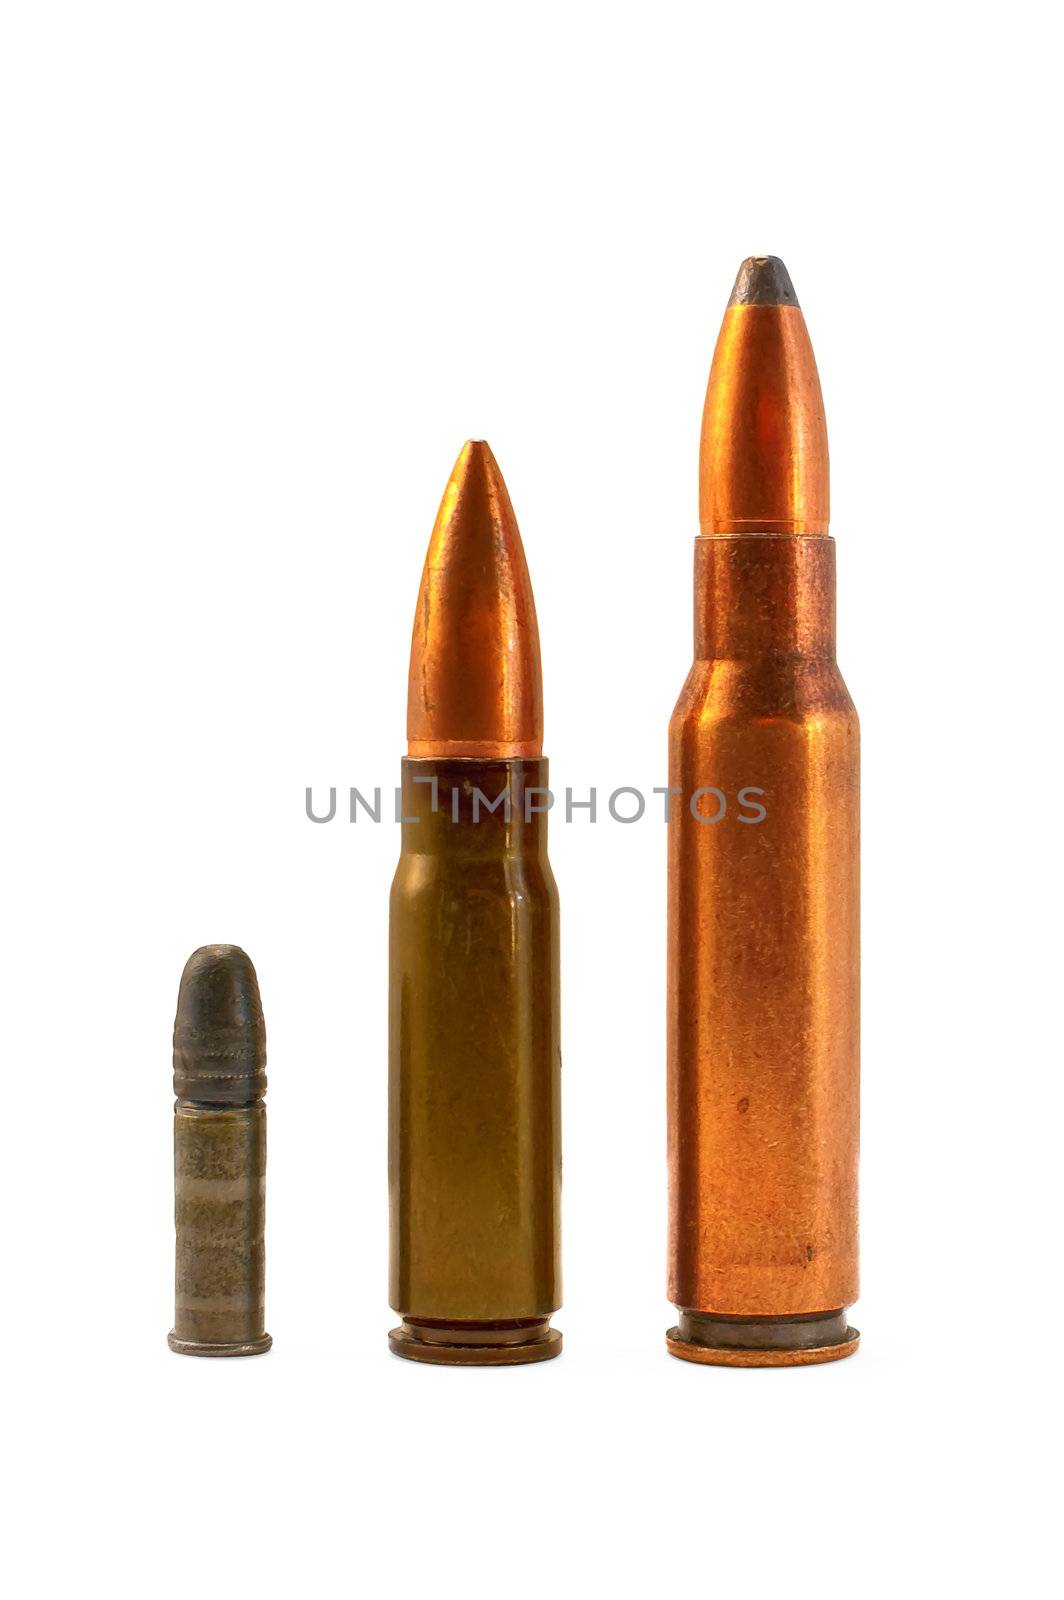 Ammunition for the automatic weapons and small-bore rifle by rezkrr